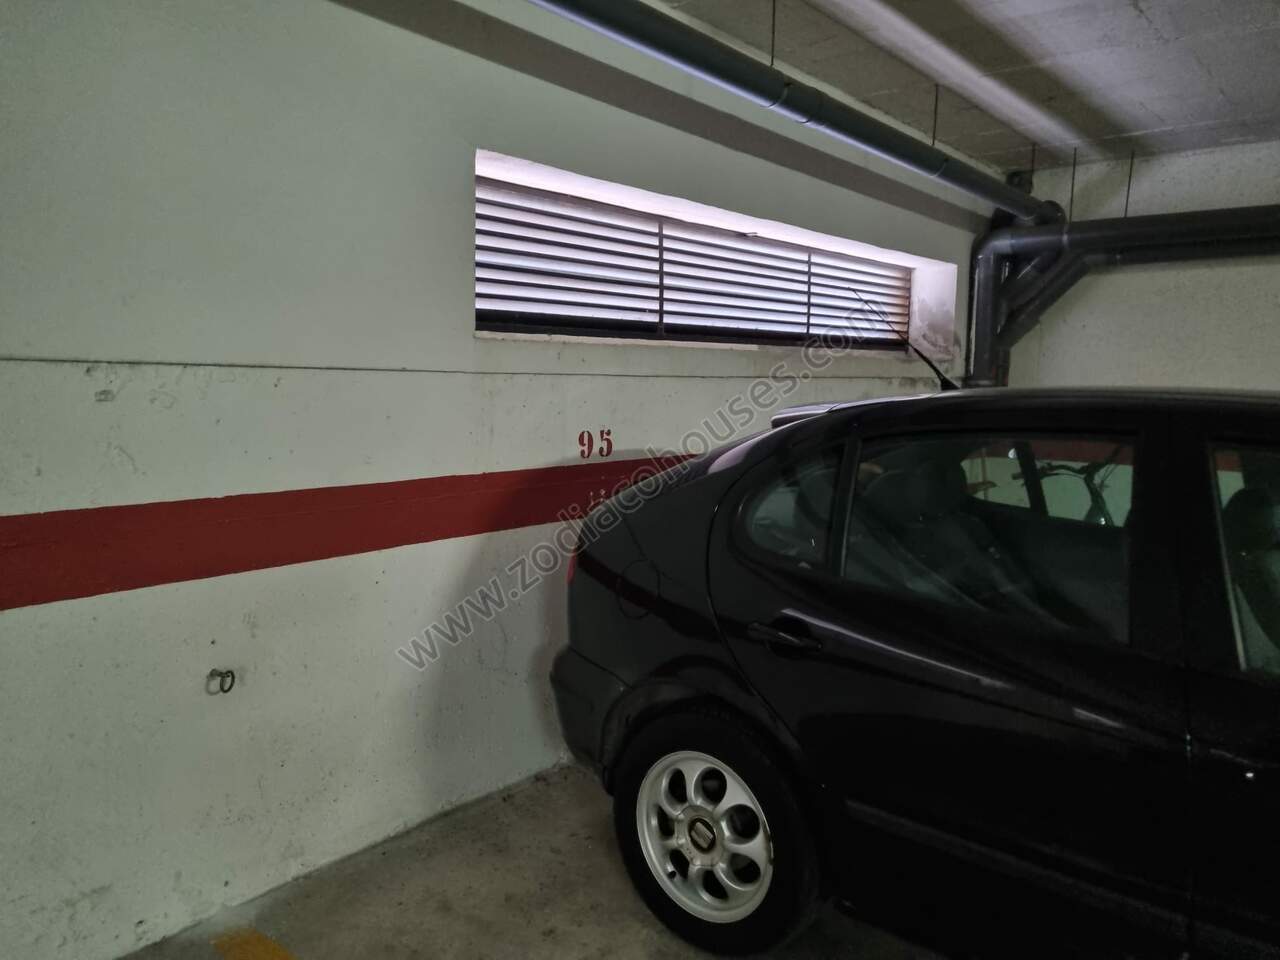 128219 Parking space - 5